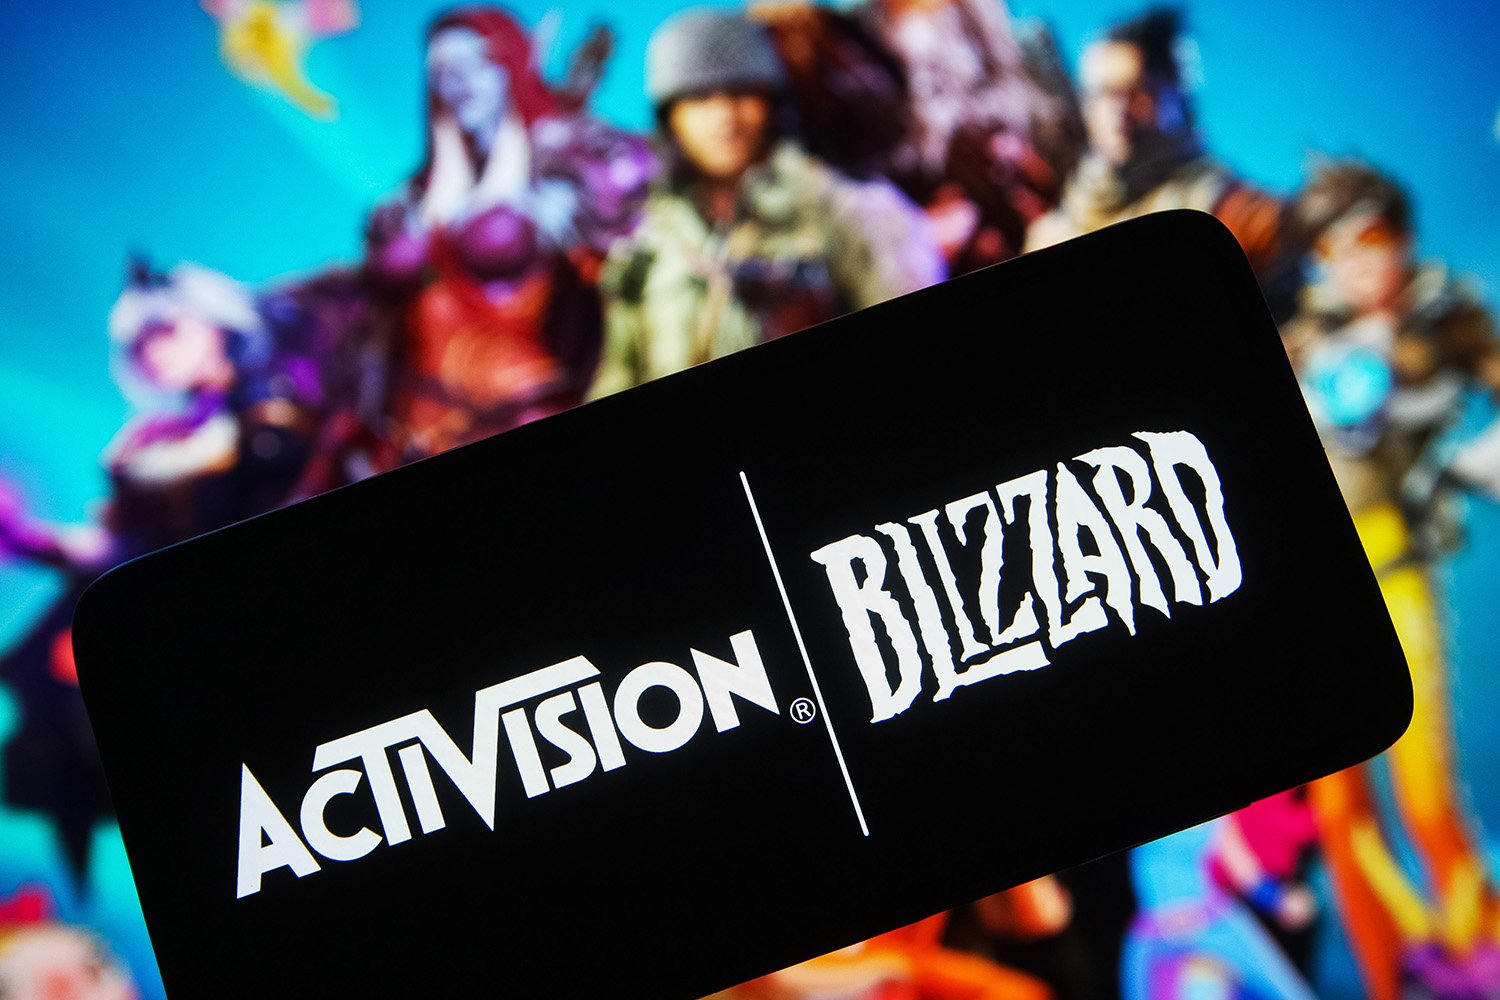 Xbox Activision deal explained: Your biggest questions answered